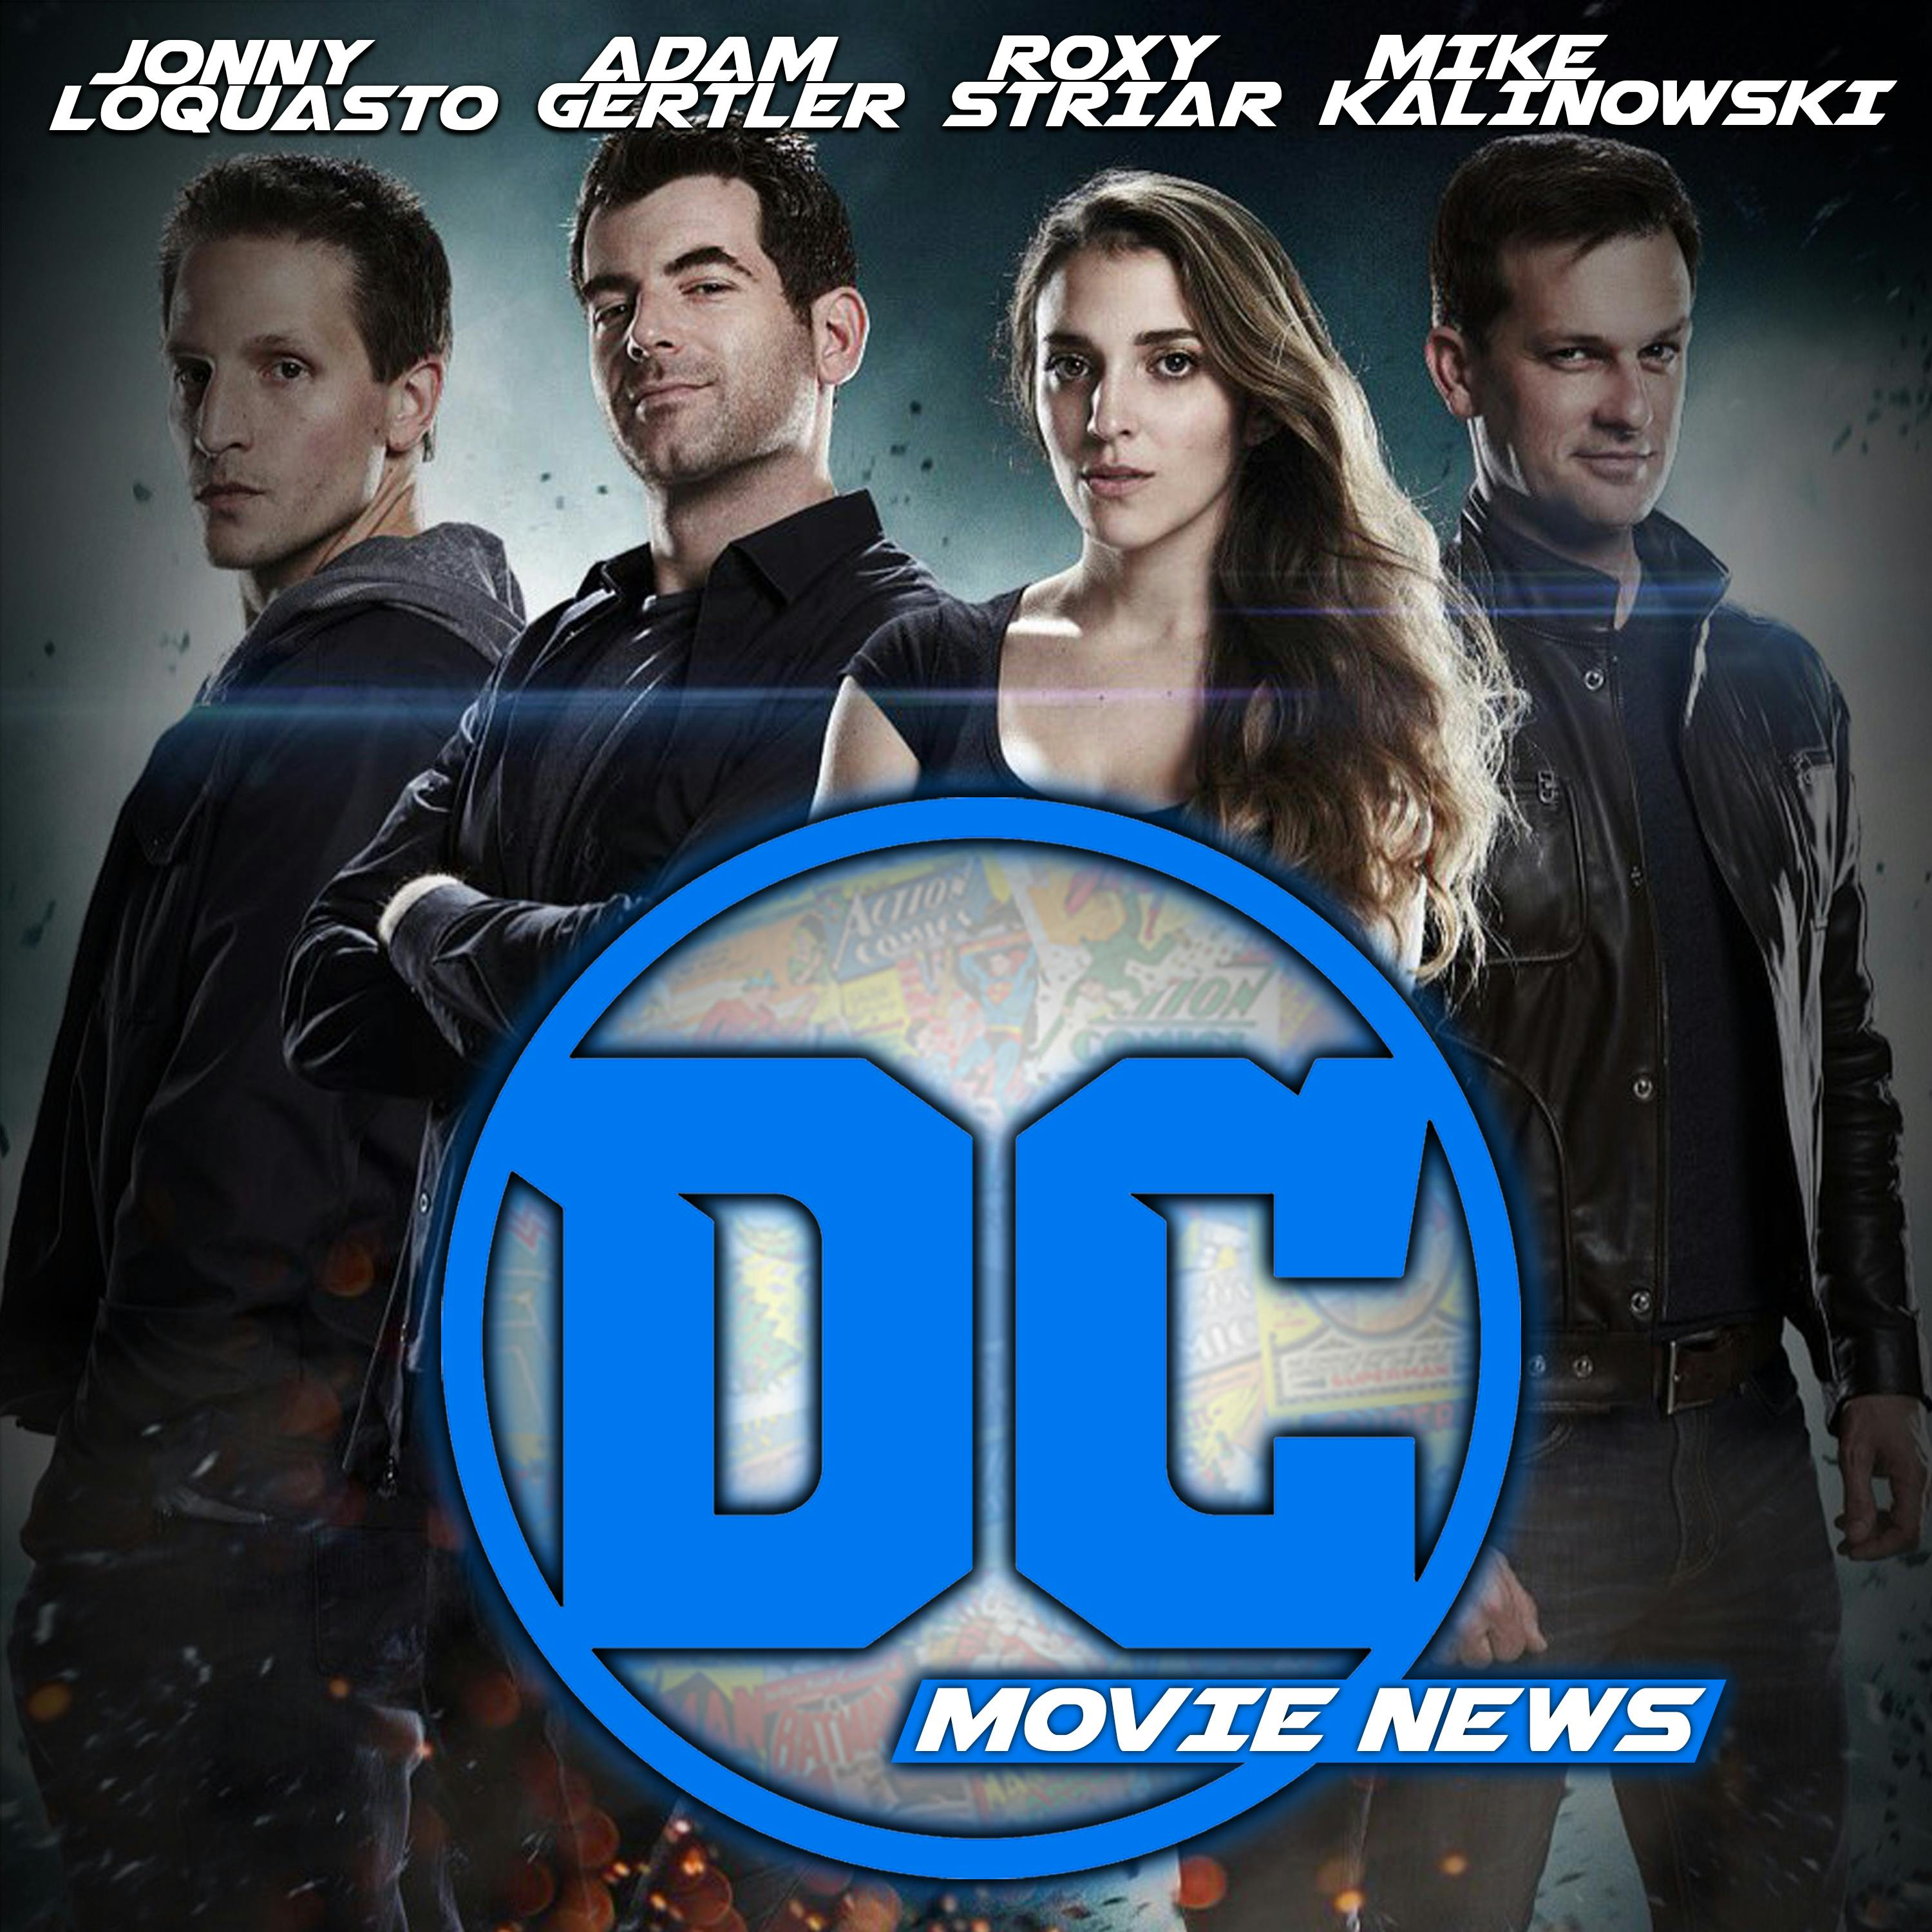 Lex Luthor Jr., Flash Movie and TV Time! – DC Movie News (October 7th, 2015)